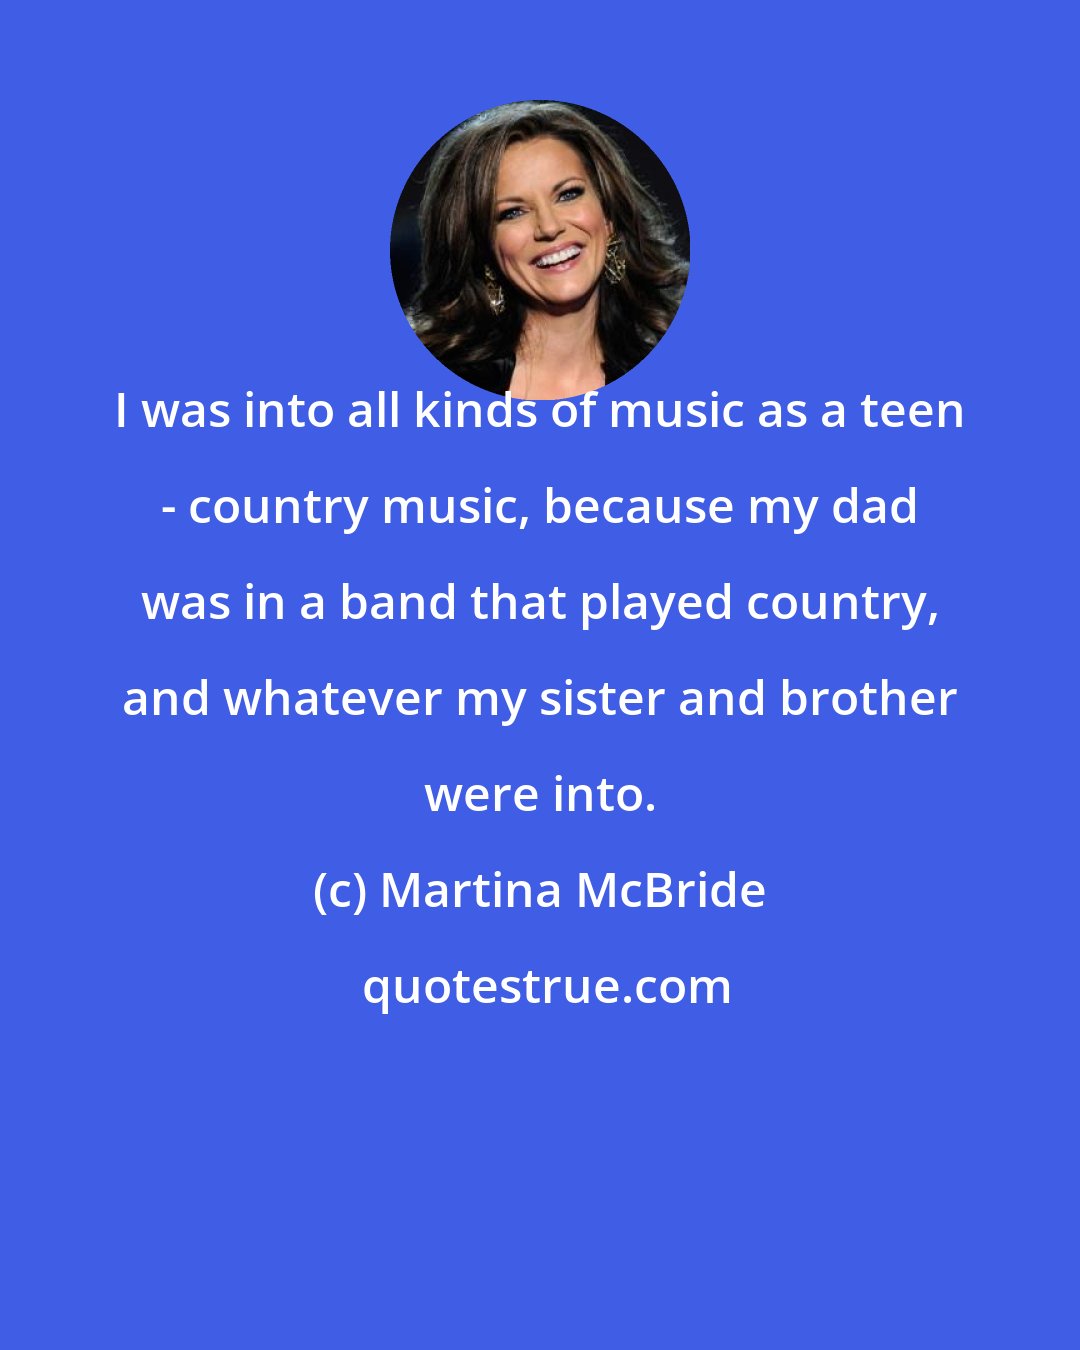 Martina McBride: I was into all kinds of music as a teen - country music, because my dad was in a band that played country, and whatever my sister and brother were into.